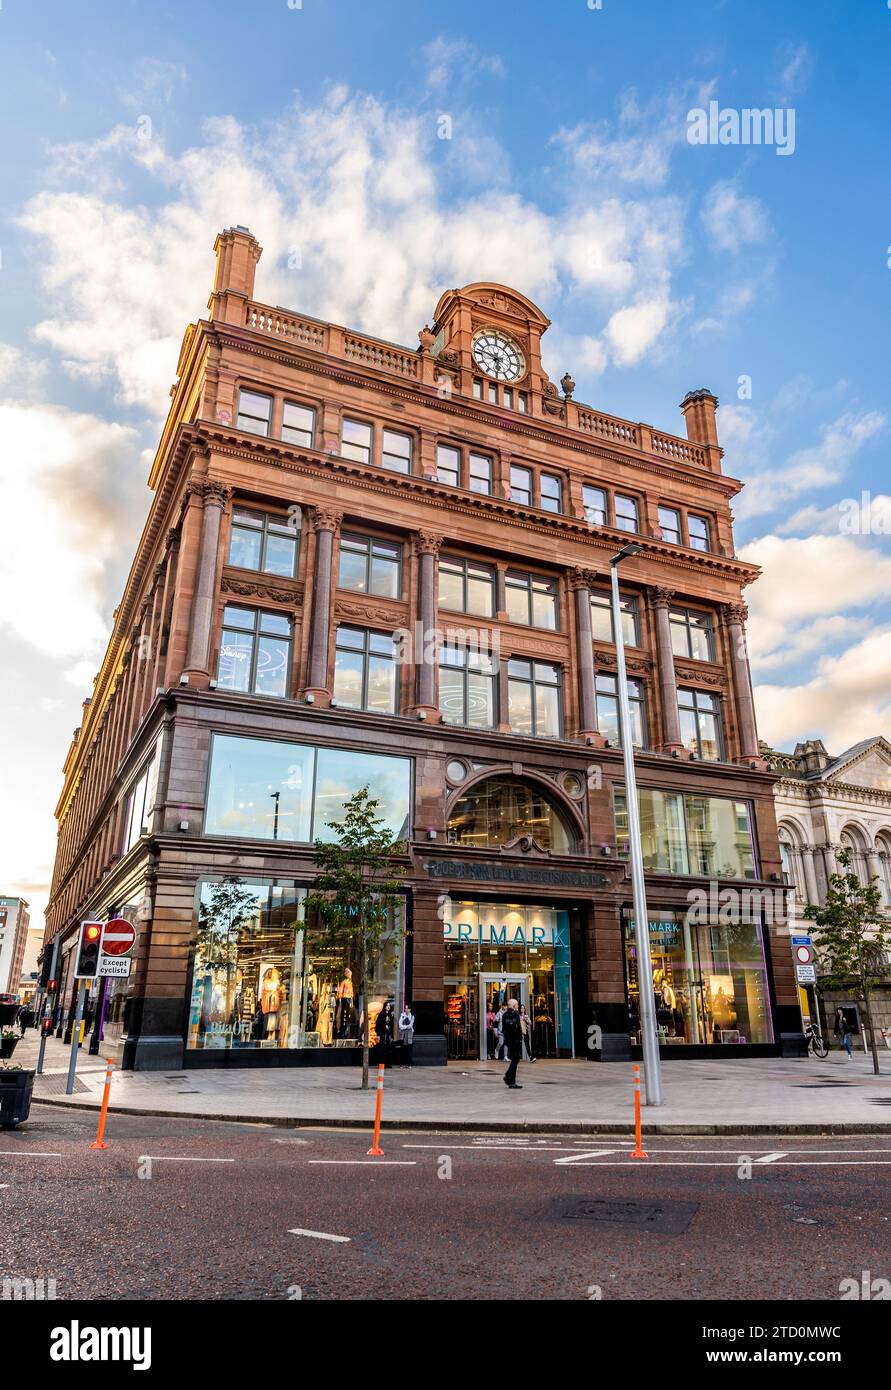 Exterior of Bank Buildings, built in 18th century, now store of fast-fashion retailer Primark, in Castle Street, Belfast city center, Northern Ireland Stock Photo